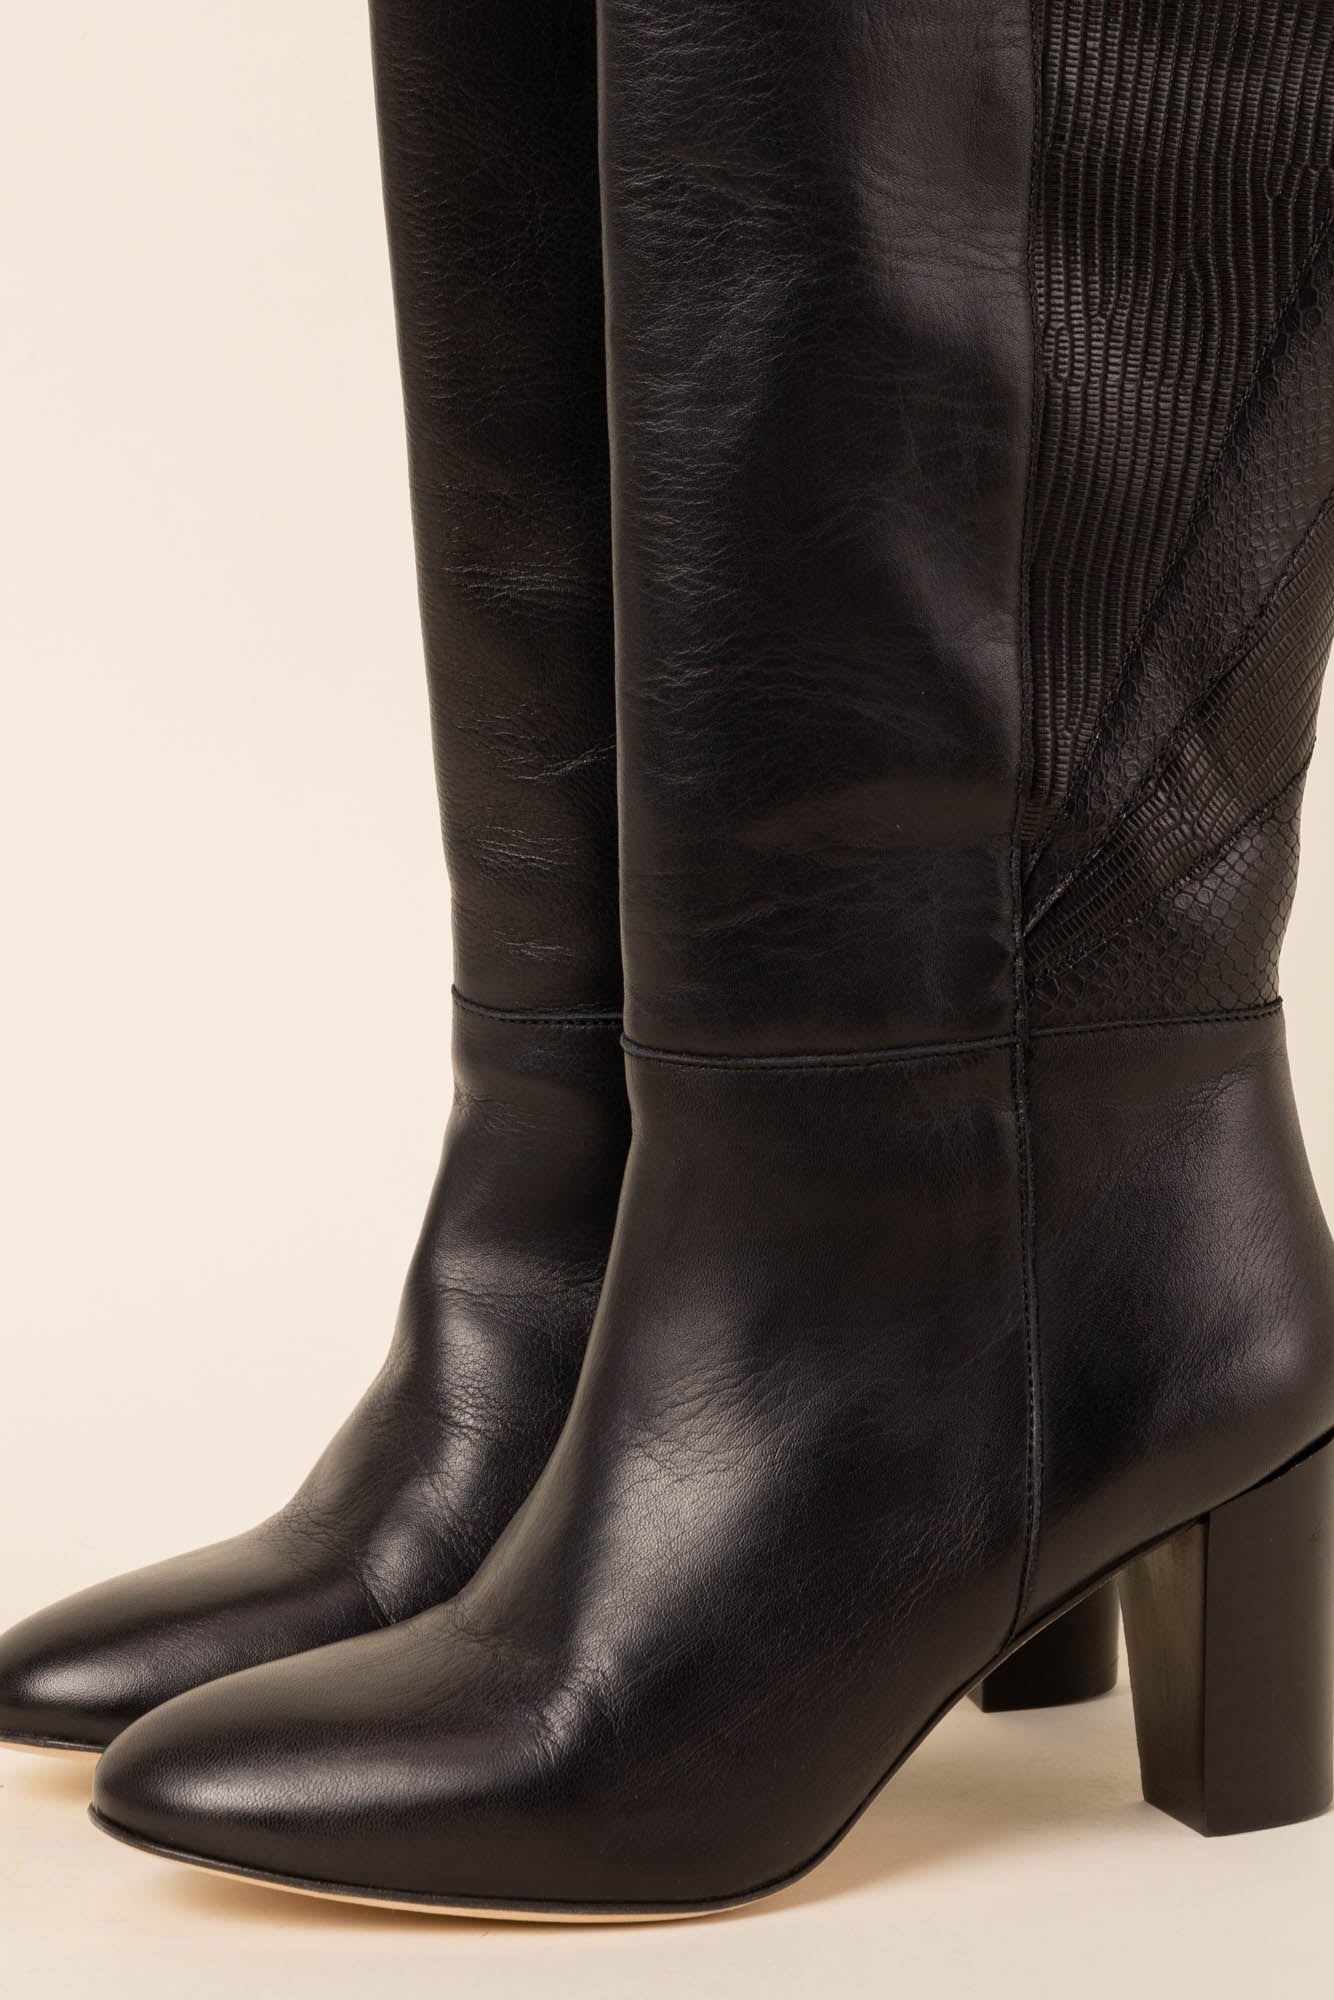 Pirouette boots black